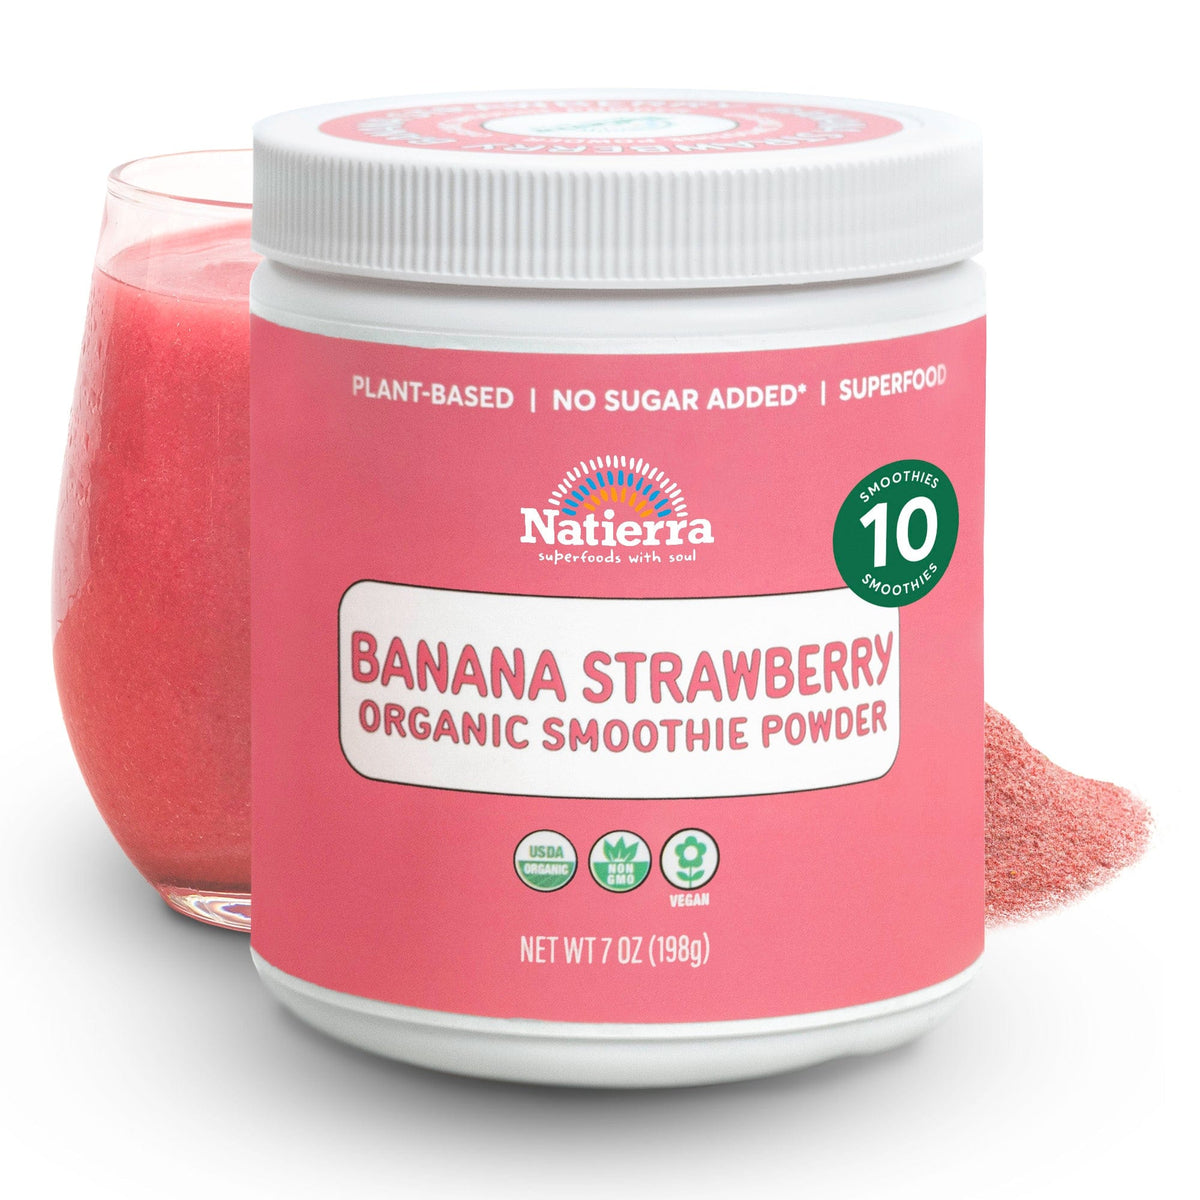 Natierra Banana Strawberry Organic Smoothie jar with glass and powder in the background